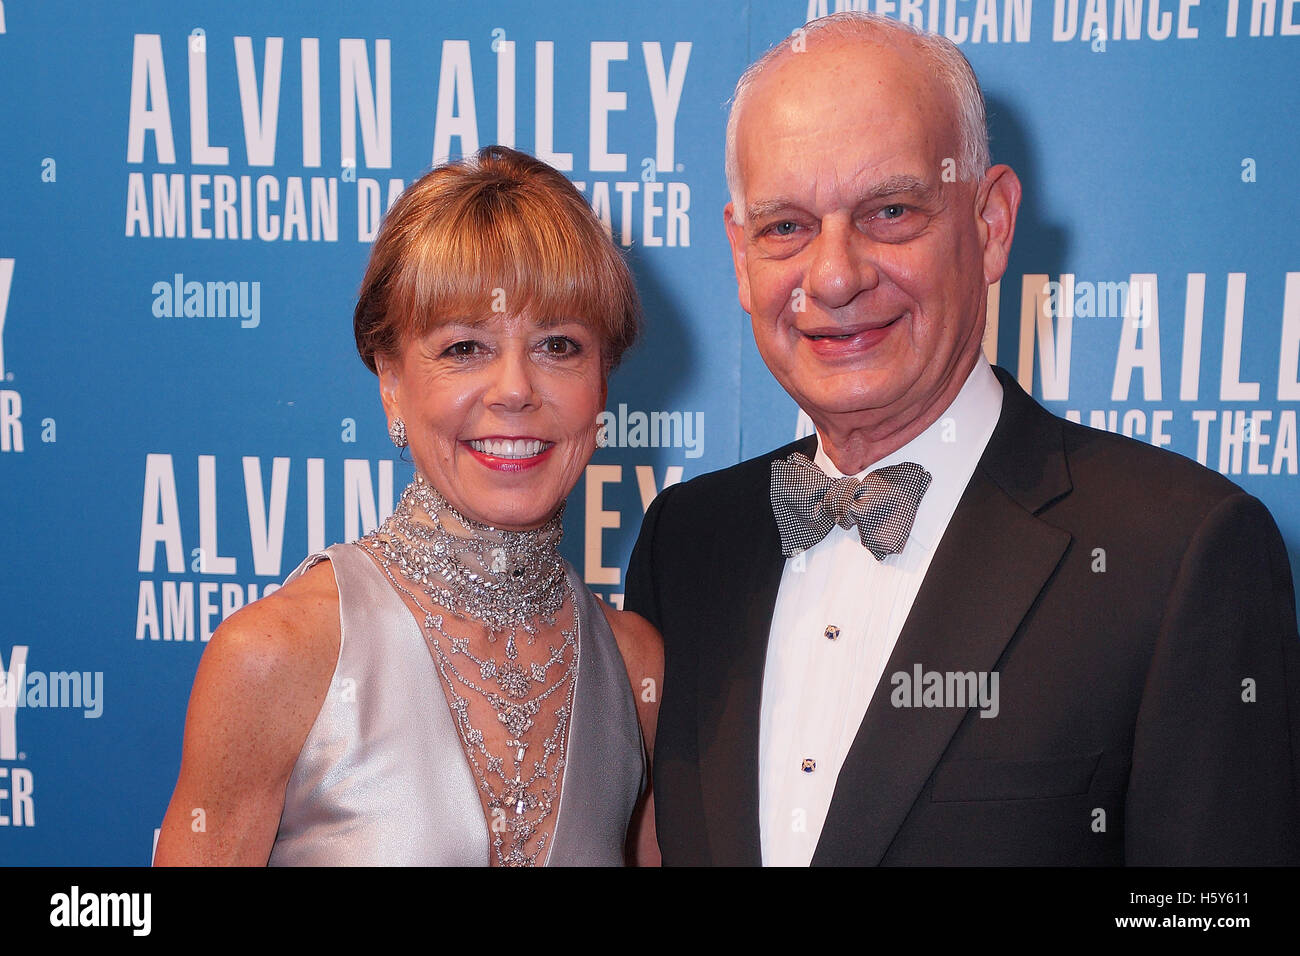 Daria & Eric J Wallach attend the Red Carpet at the Opening Night Gala Benefit for the 2015/2016 Alvin Ailey American Dance Theater season on December 2, 2015 in New York City. Stock Photo